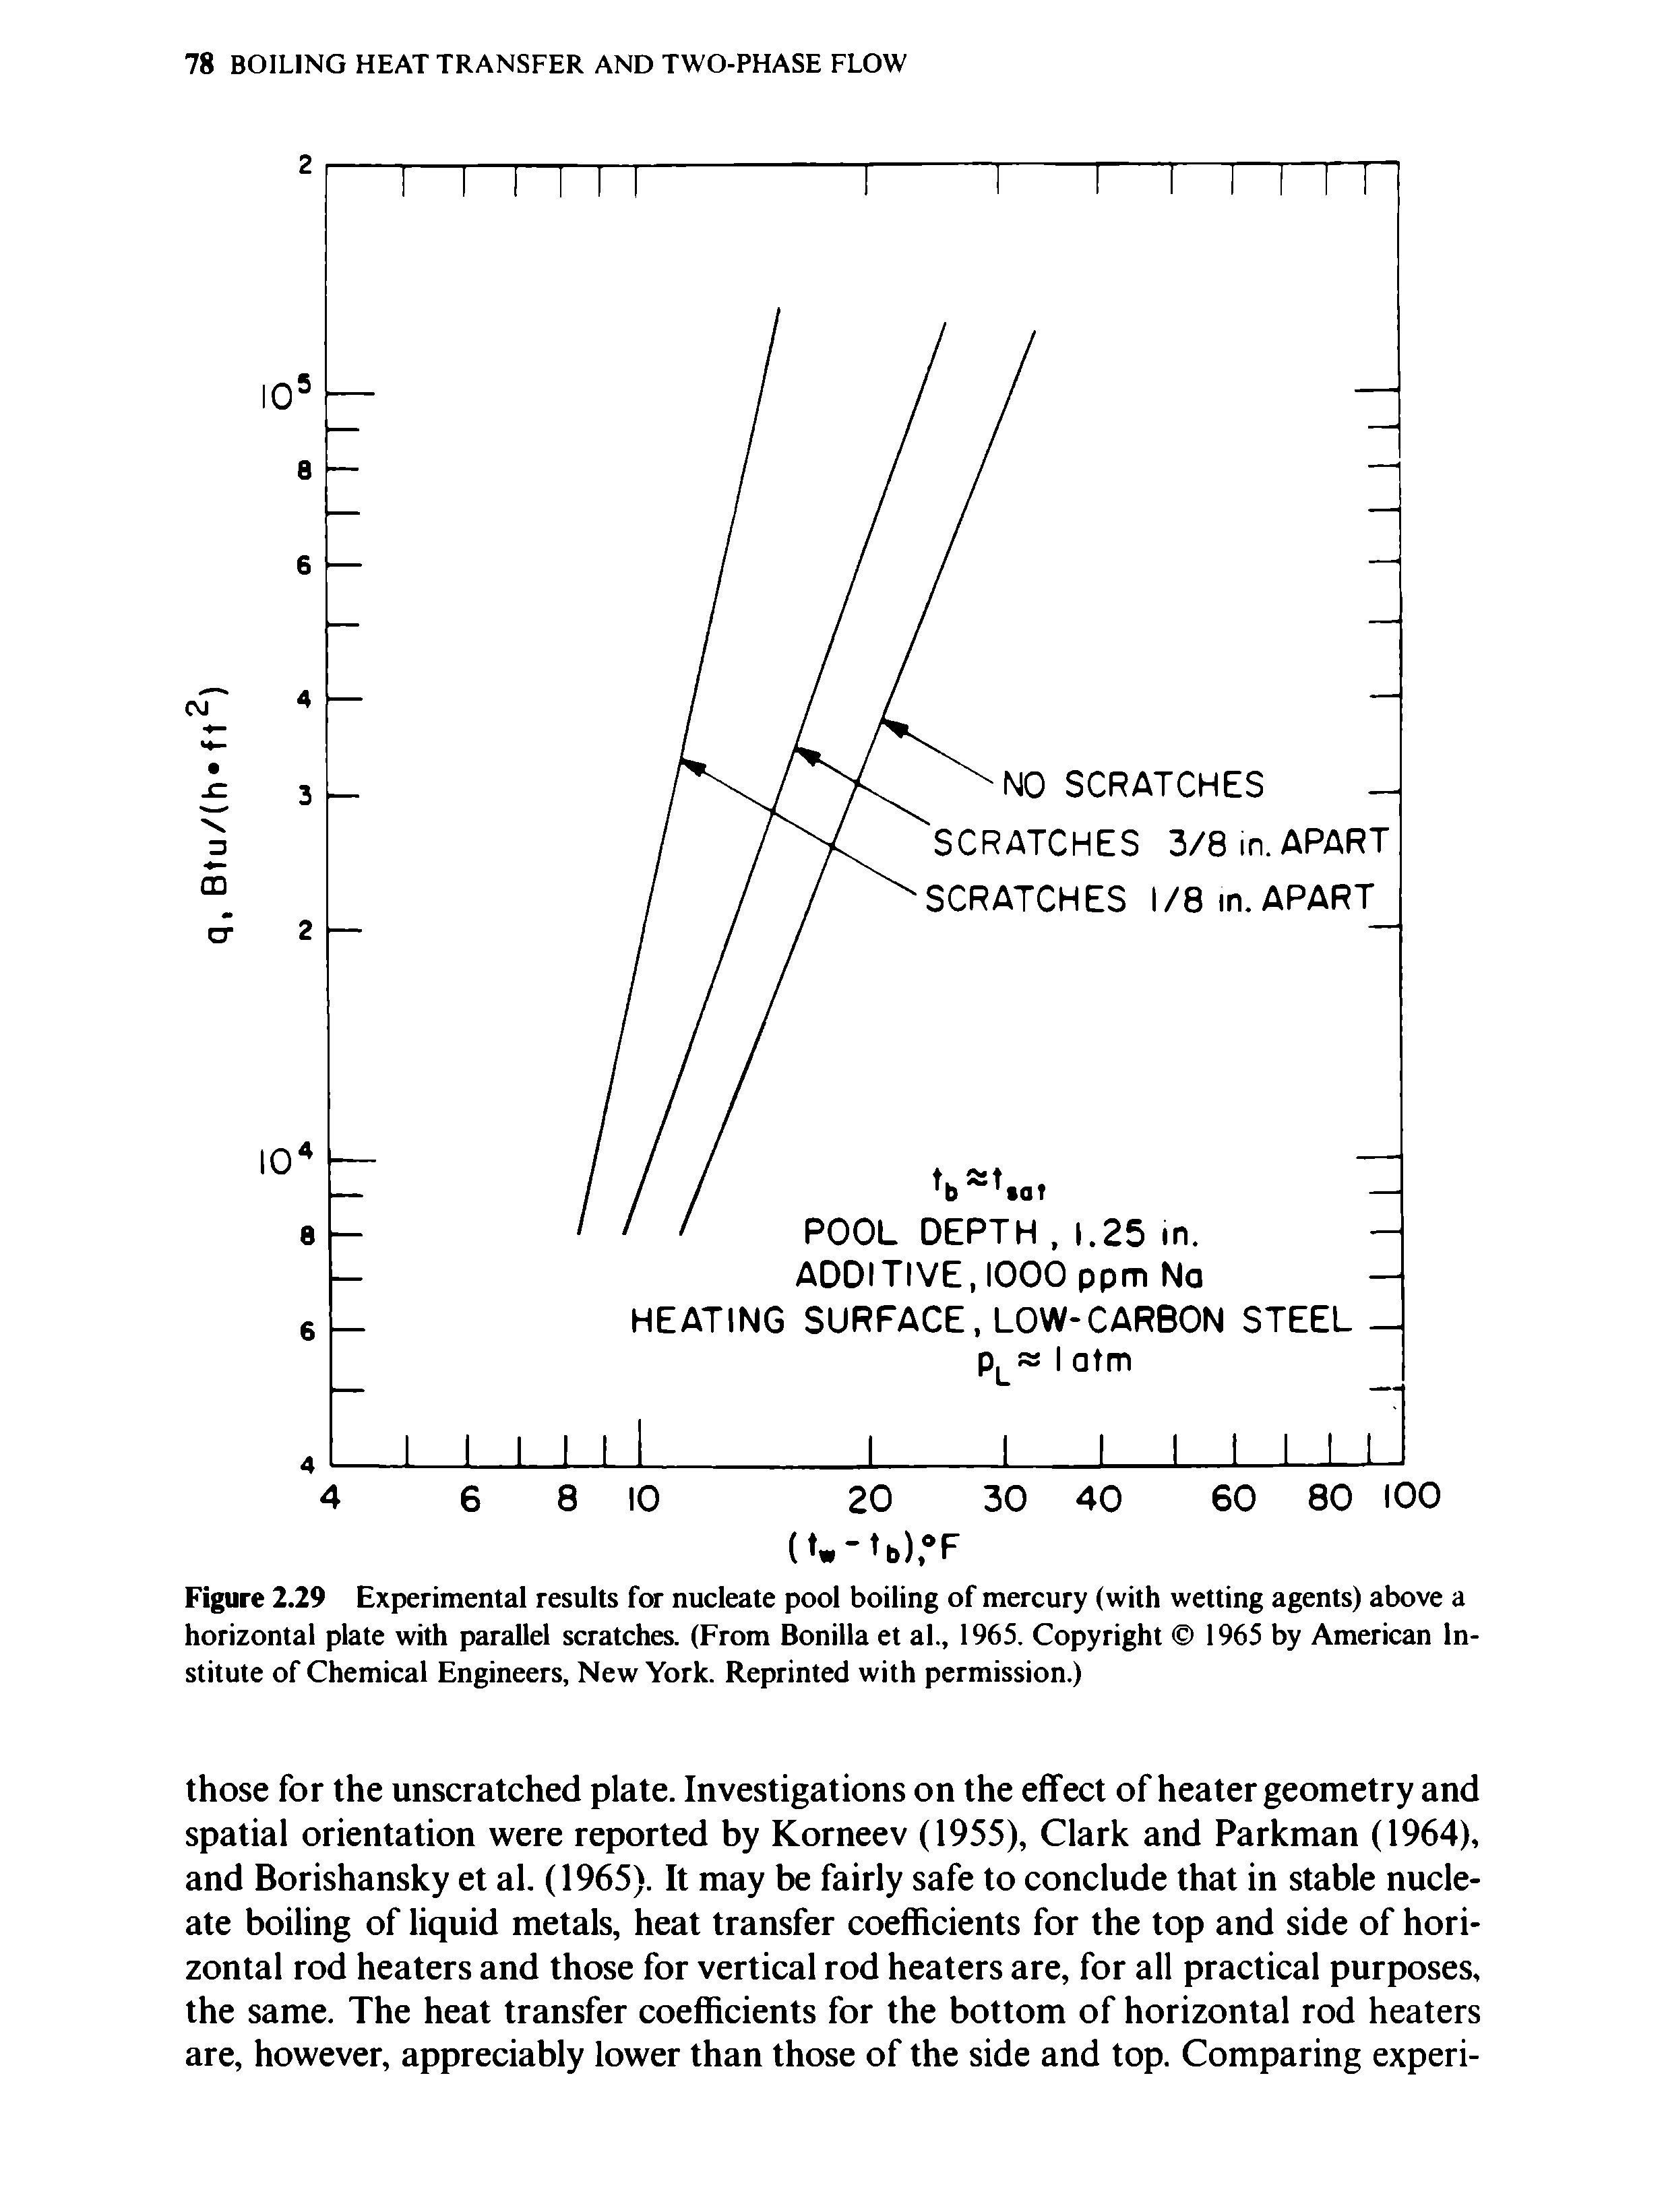 Figure 2.29 Experimental results for nucleate pool boiling of mercury (with wetting agents) above a horizontal plate with parallel scratches. (From Bonilla et al., 1965. Copyright 1965 by American Institute of Chemical Engineers, New York. Reprinted with permission.)...